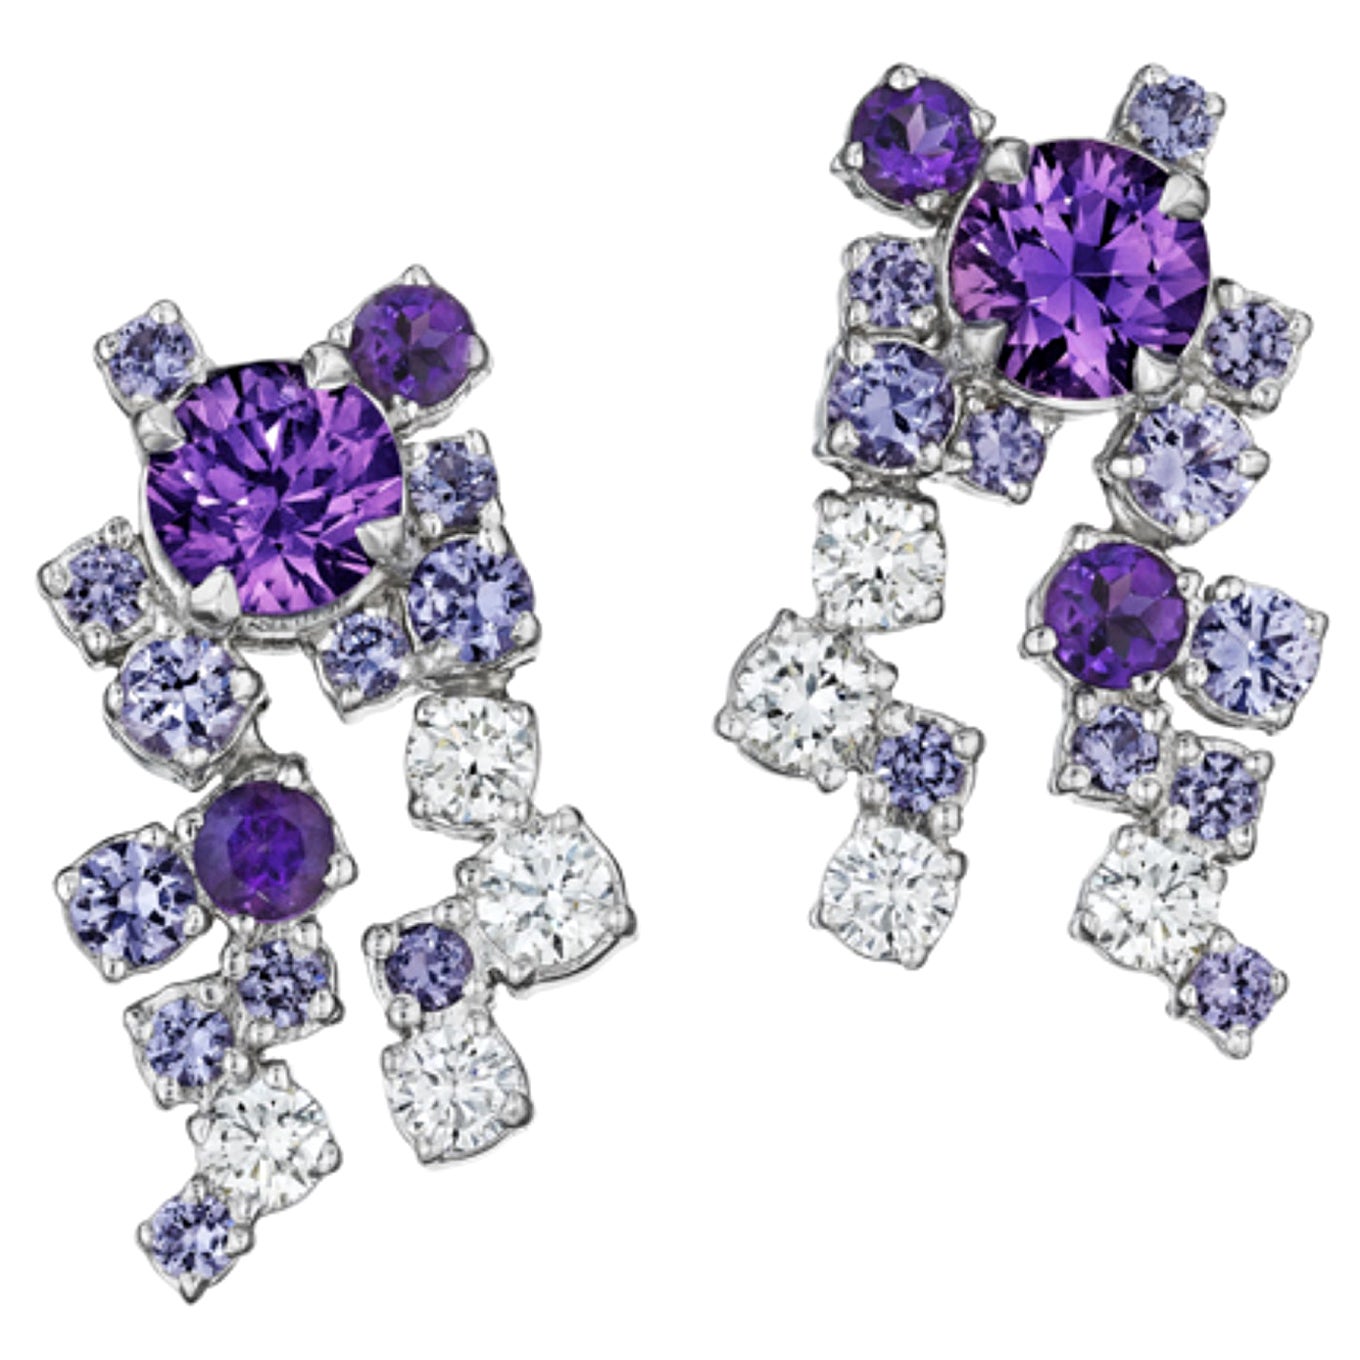 Melting Ice 18k White Gold Purple Sapphire Earrings by MadStone